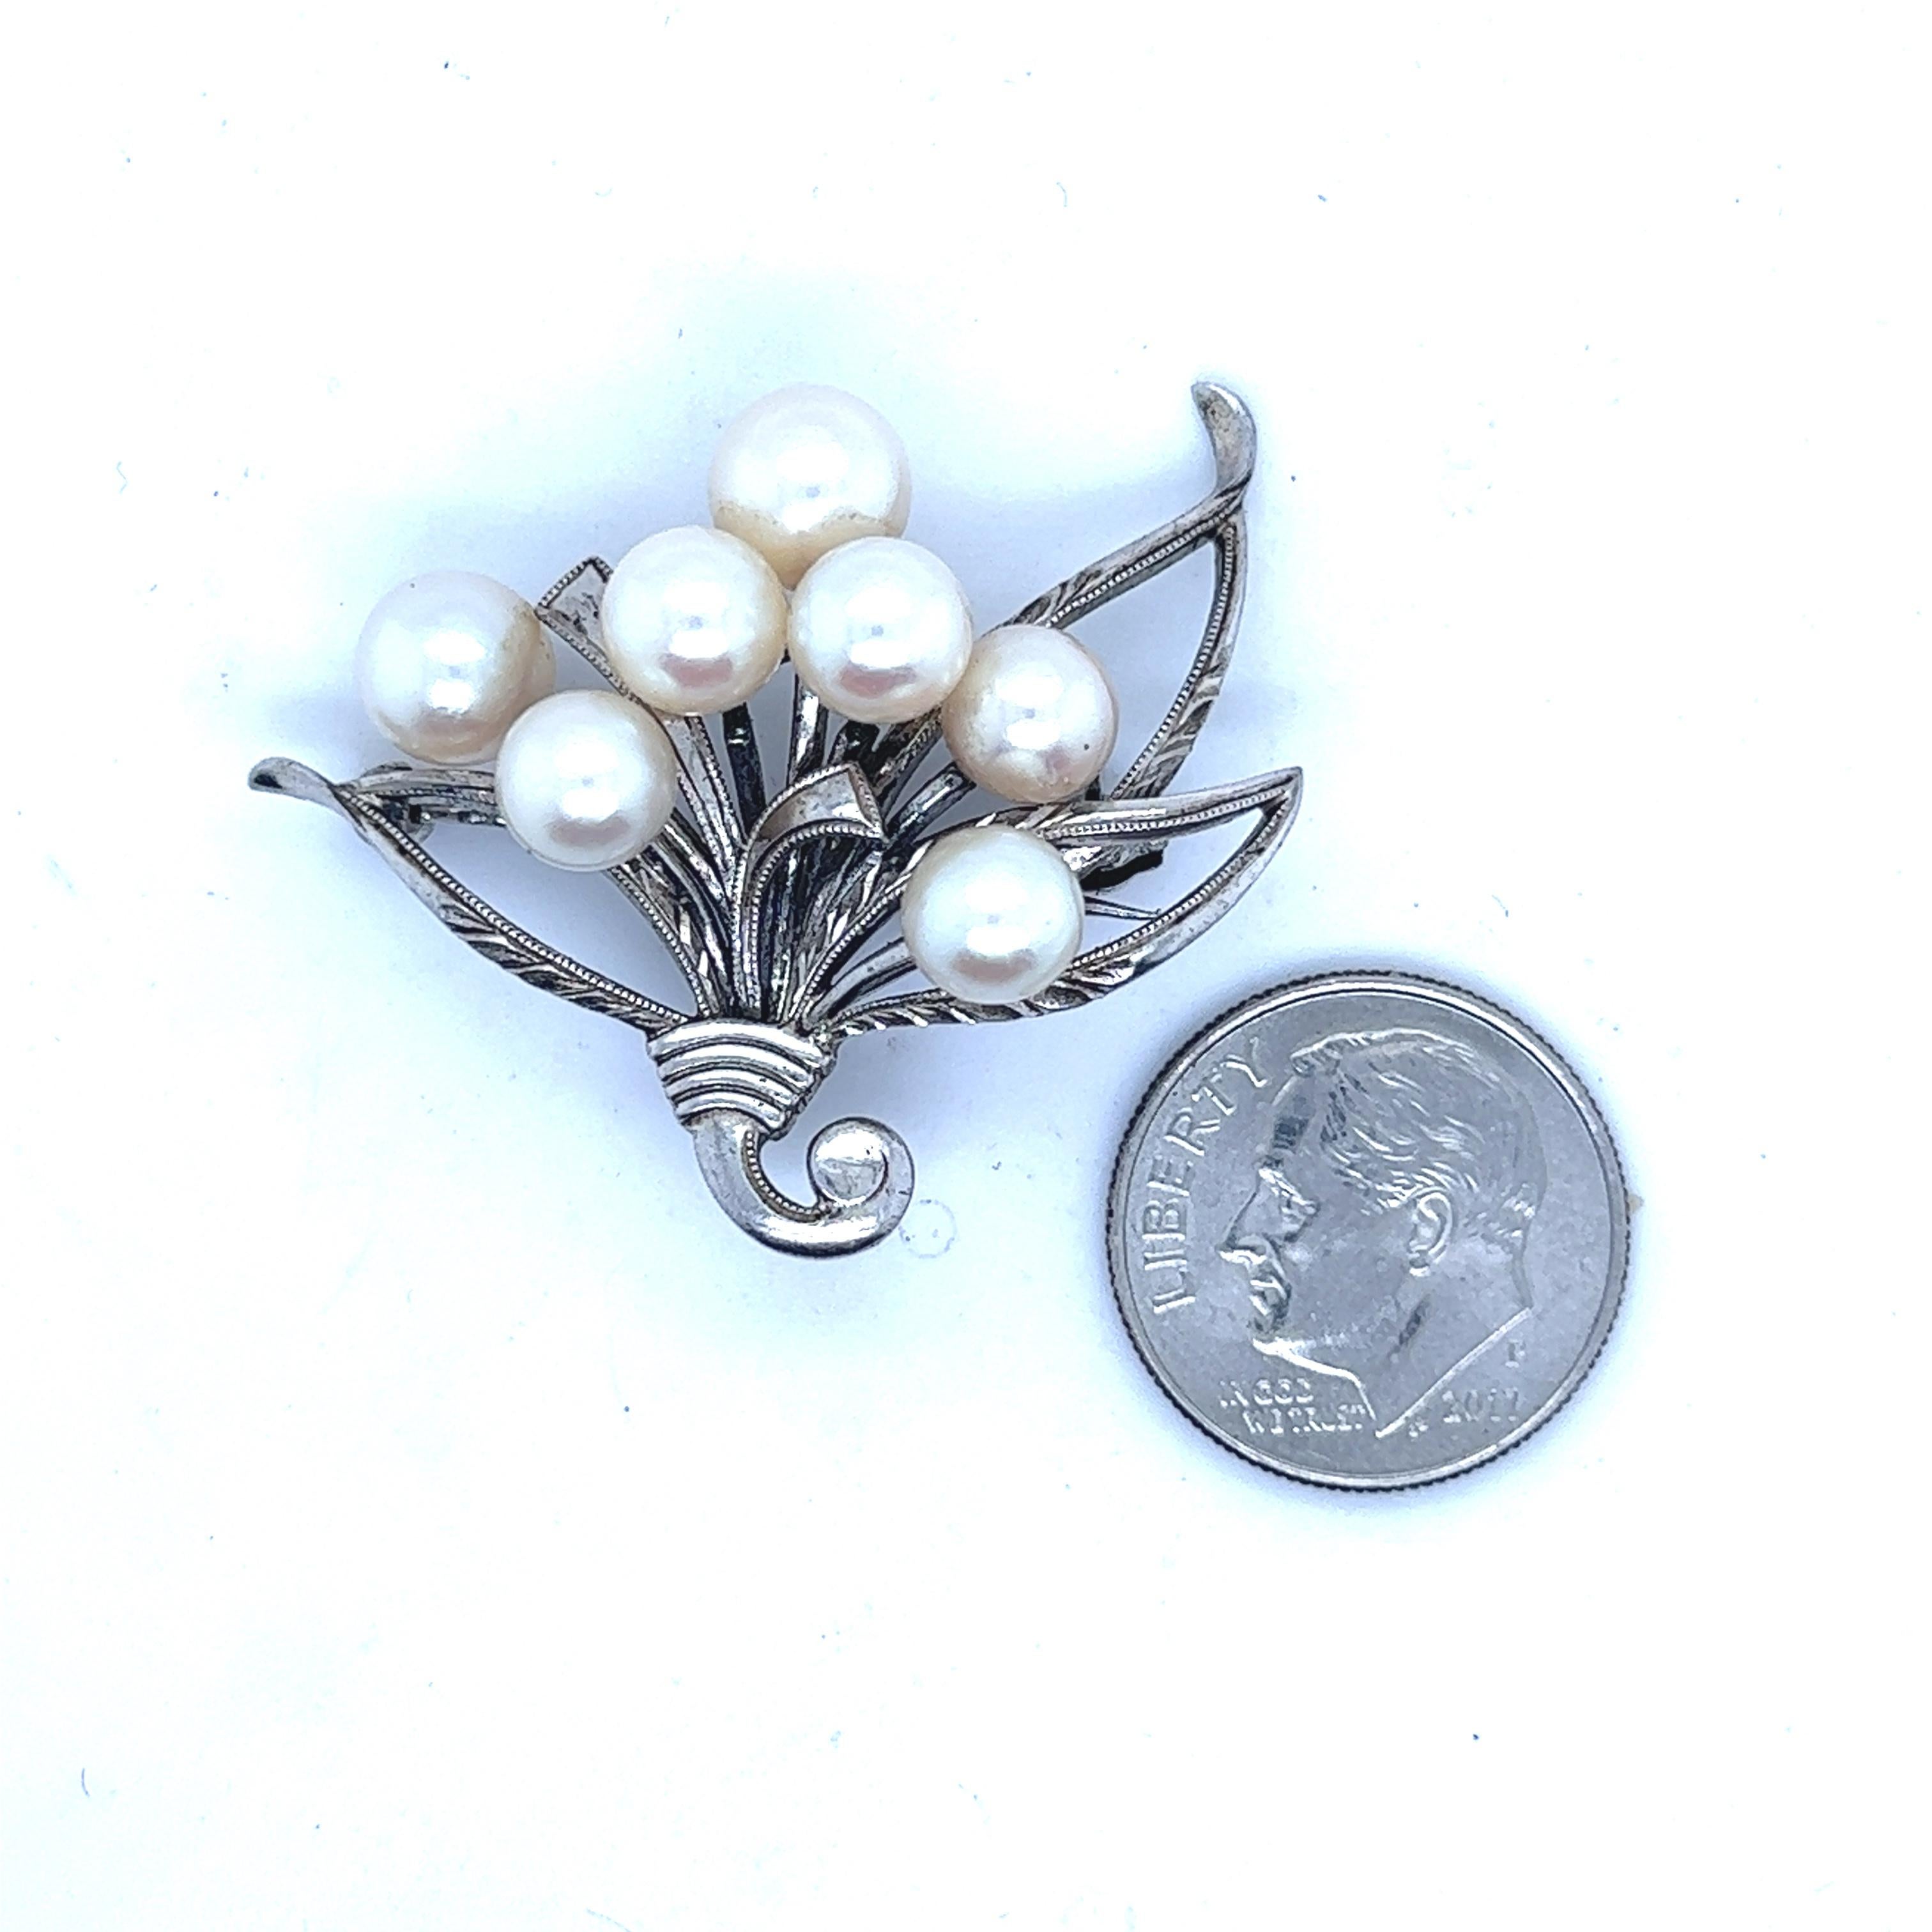 Authentic Mikimoto Estate Akoya Pearl Brooch Pin Sterling Silver 6.74 mm M303

This elegant Authentic Mikimoto Estate sterling silver brooch has 7 Saltwater Akoya Cultured Pearls 6.74 mm and has a weight of 6.67 Grams.

TRUSTED SELLER SINCE